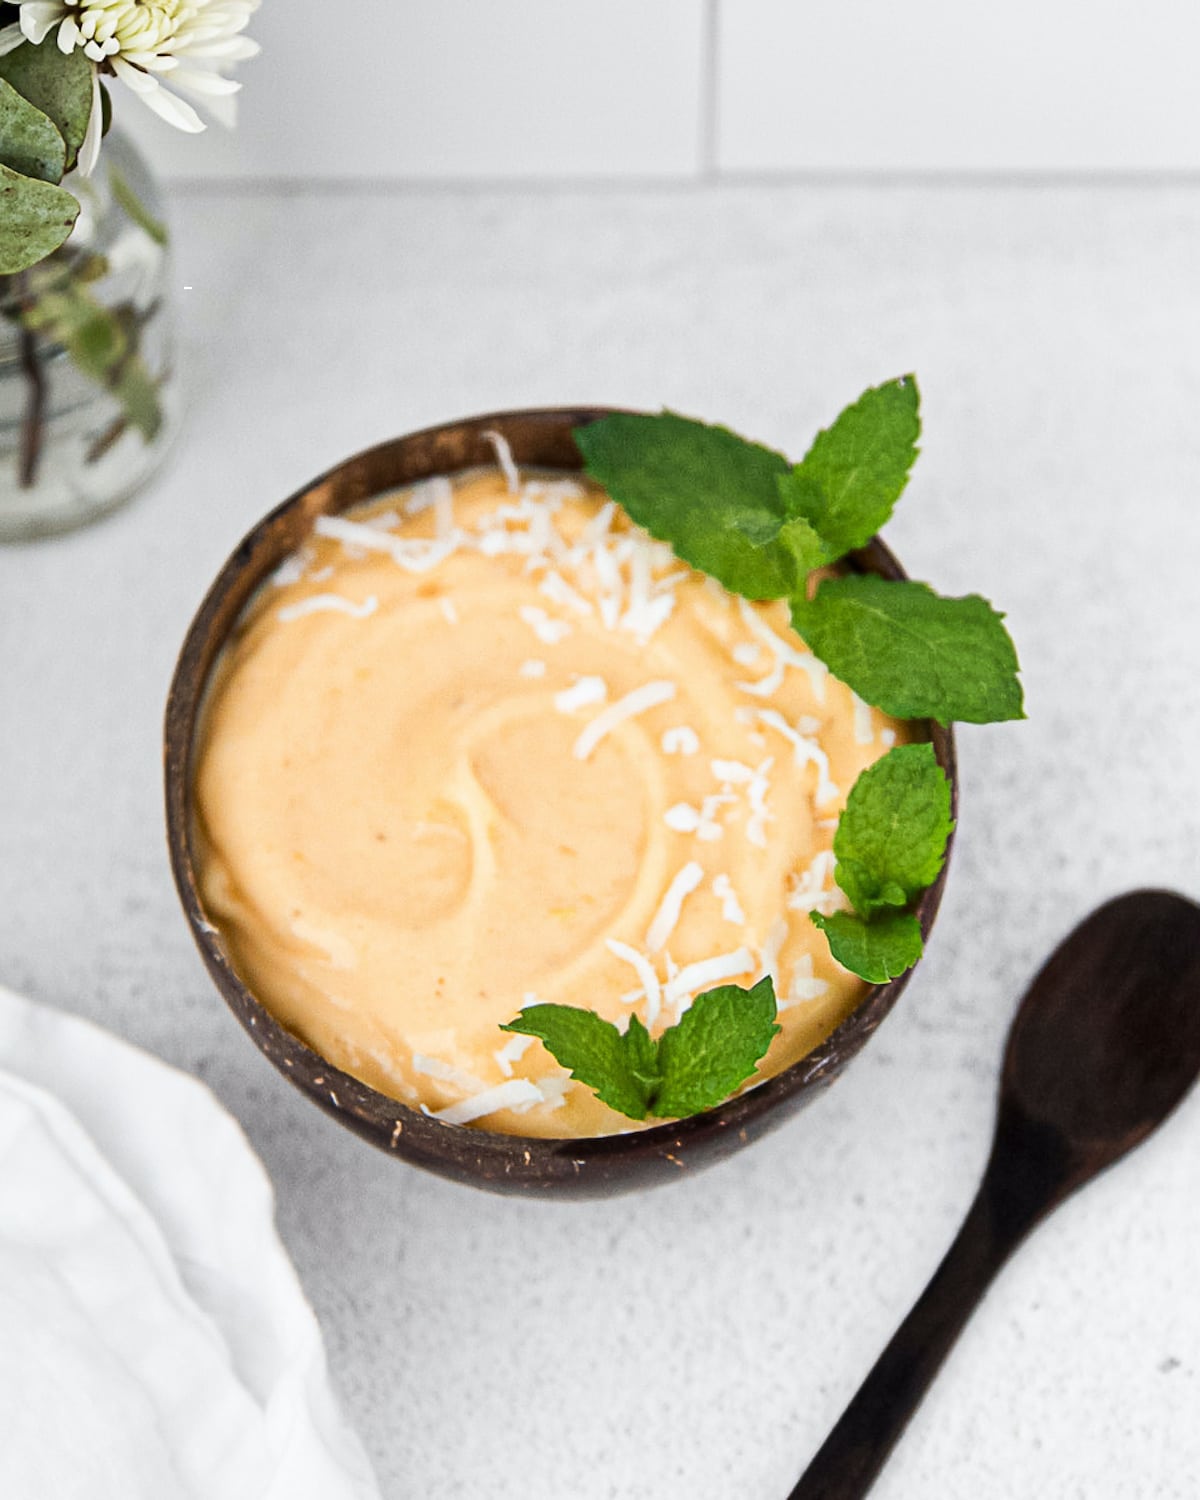 A creamy orange smoothie in a coconut bowl. There is a wooden spoon, vase of flowers, and a white cloth in the background. There are coconut flakes and and mint sprigs in the smoothie bowl.